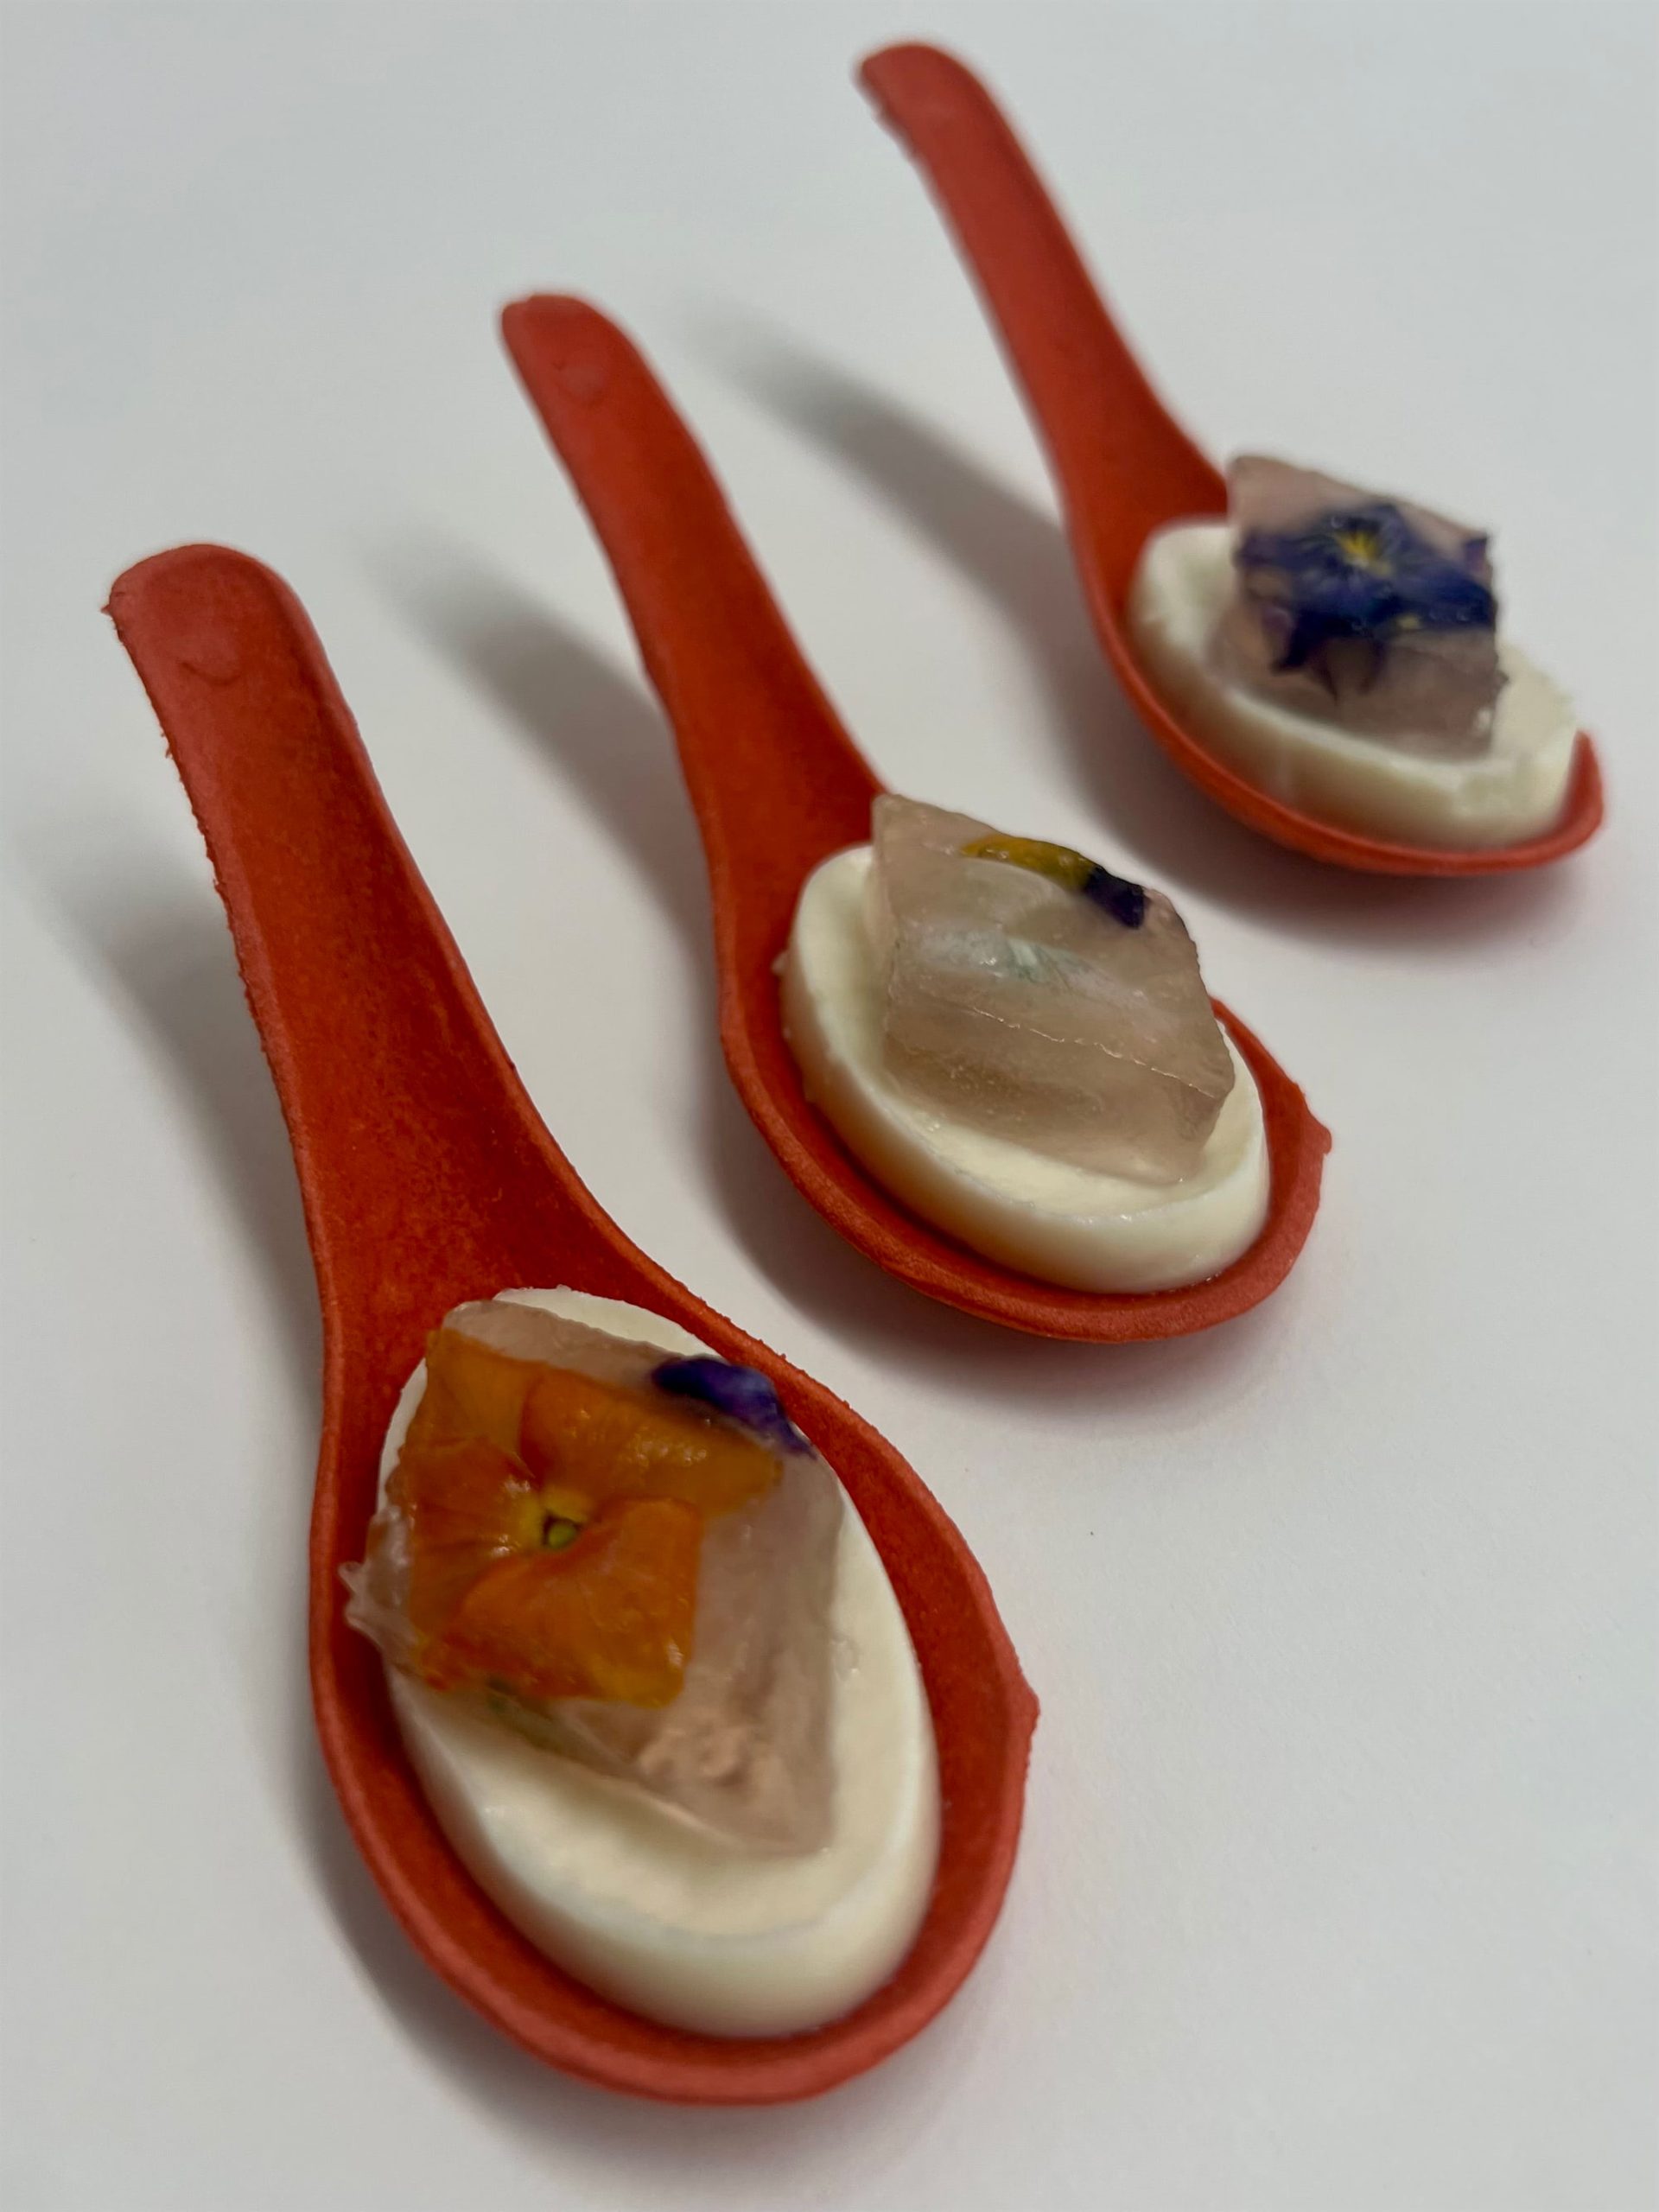 Lychee Panna Cotta, Moscato Gelee with Edible Flowers – White Chocolate Spoons